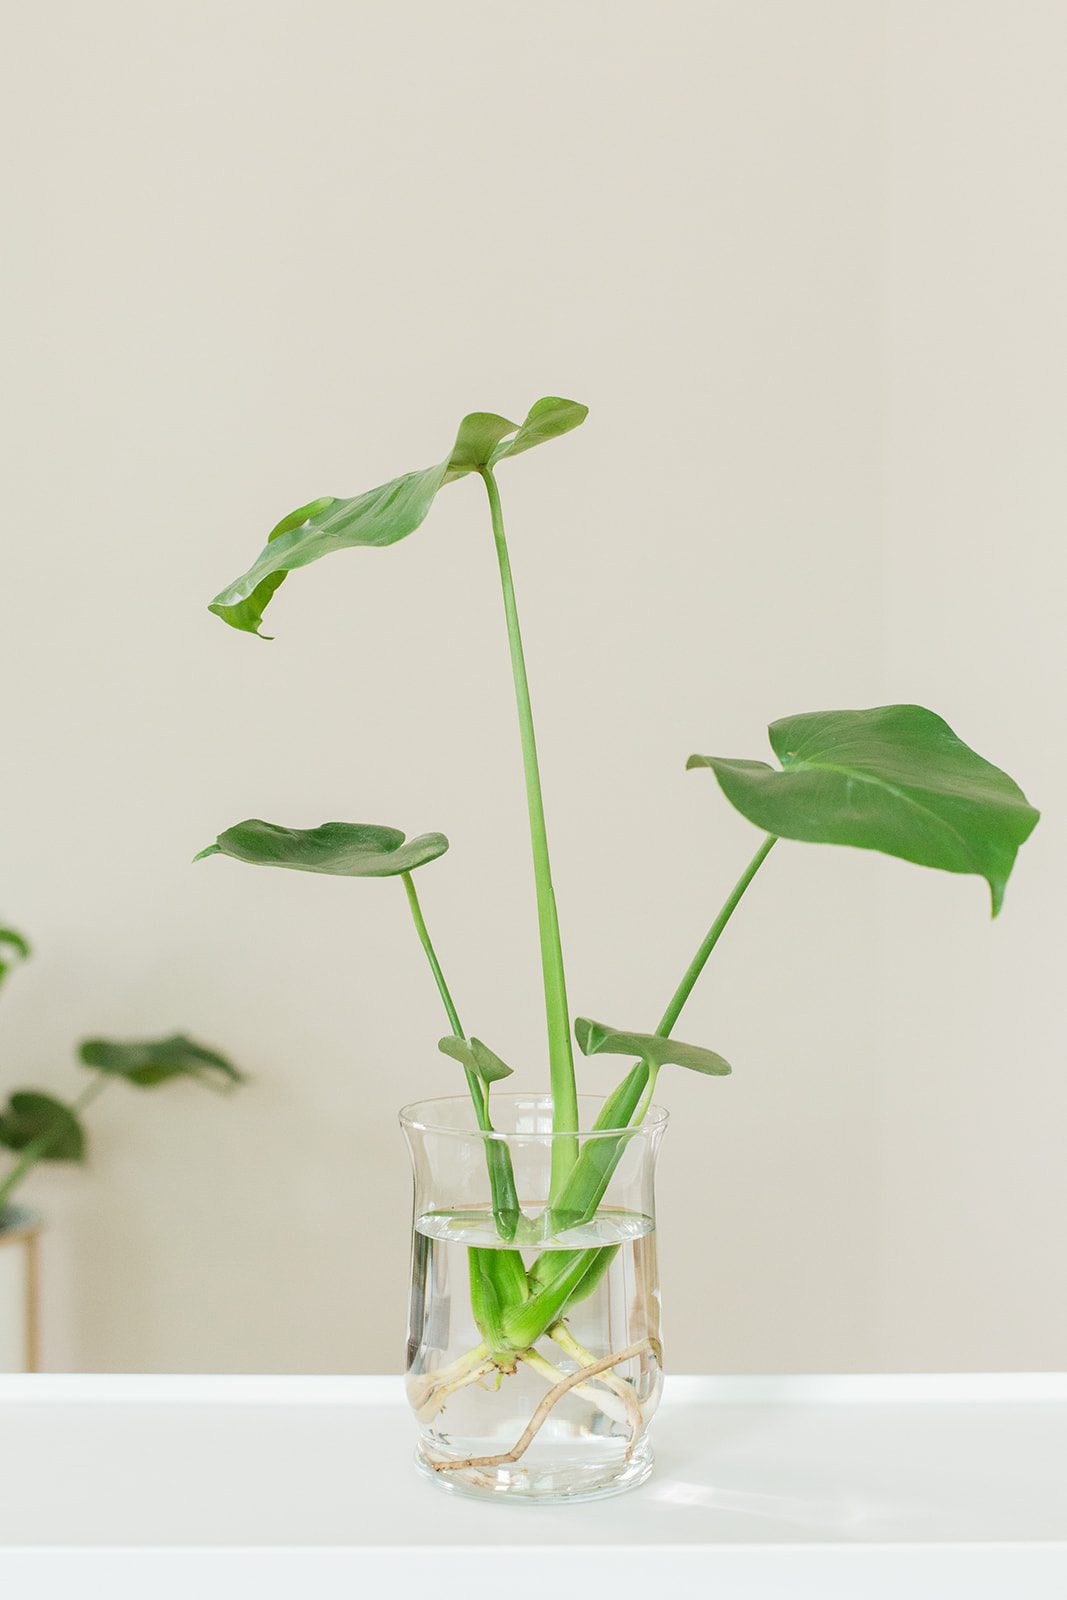 How to Propagate Monstera? 